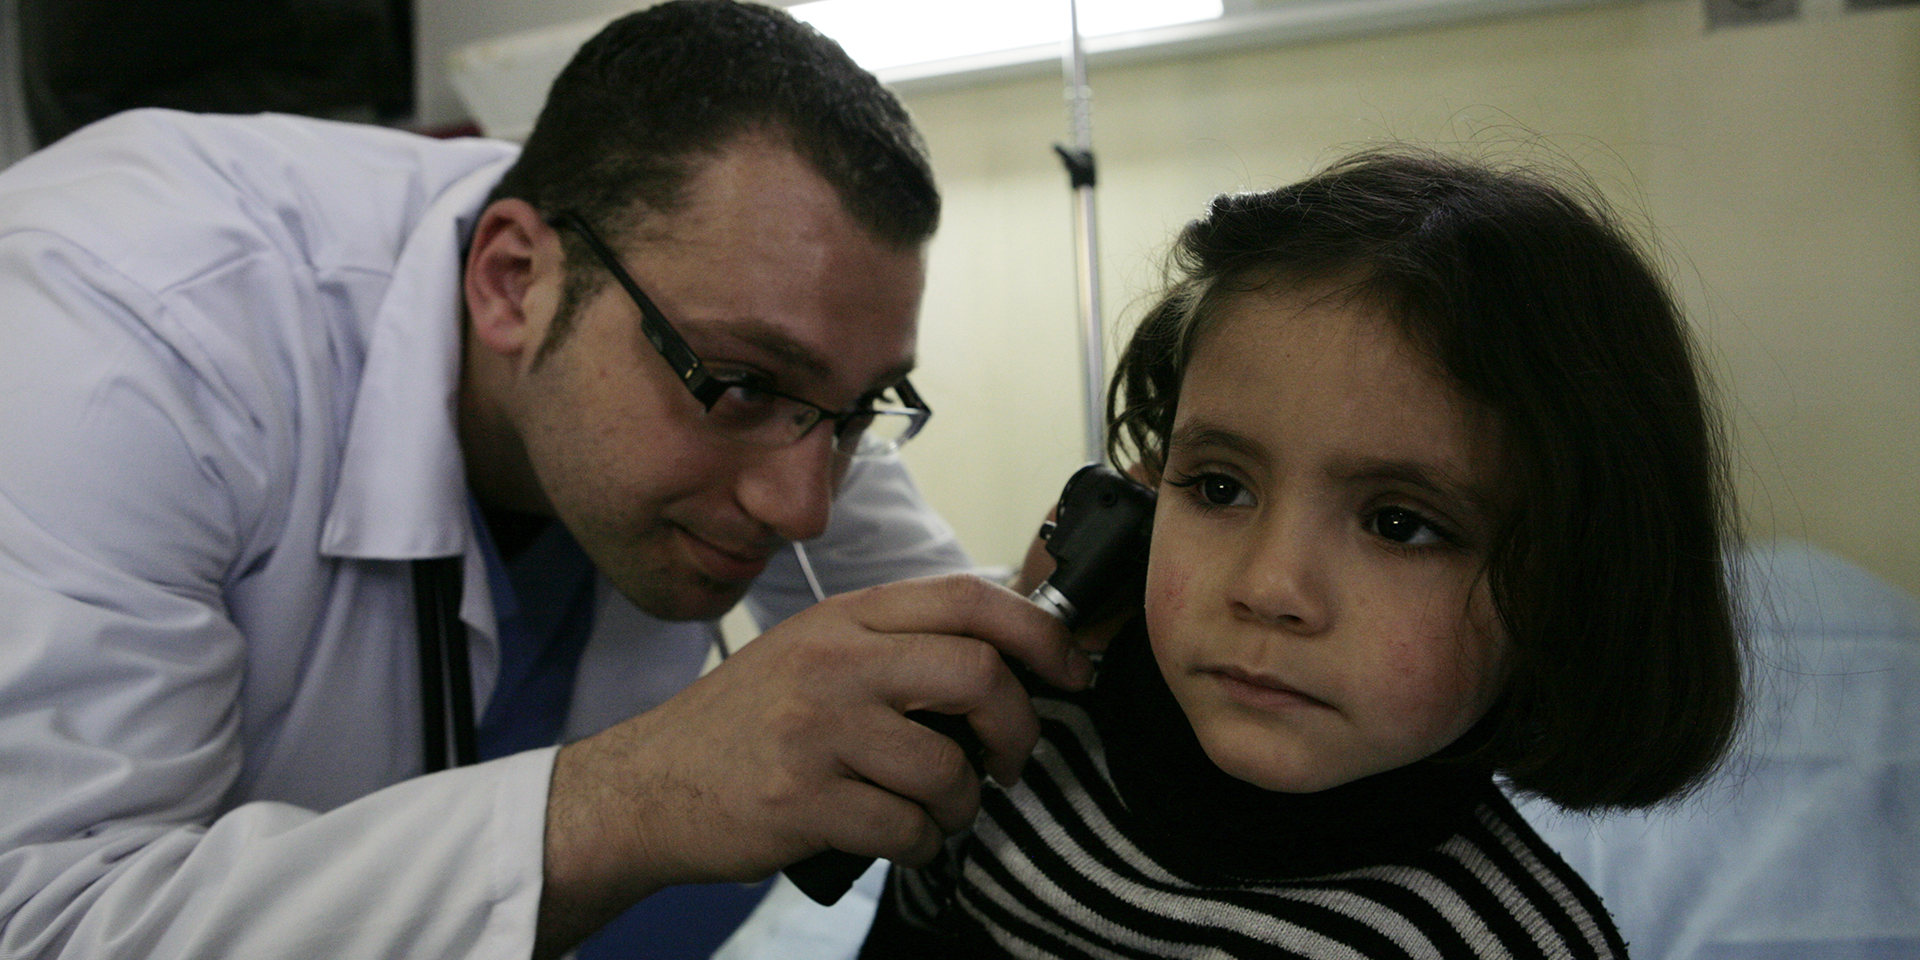 Image of a doctor checking a young girl's ear with an otoscope.